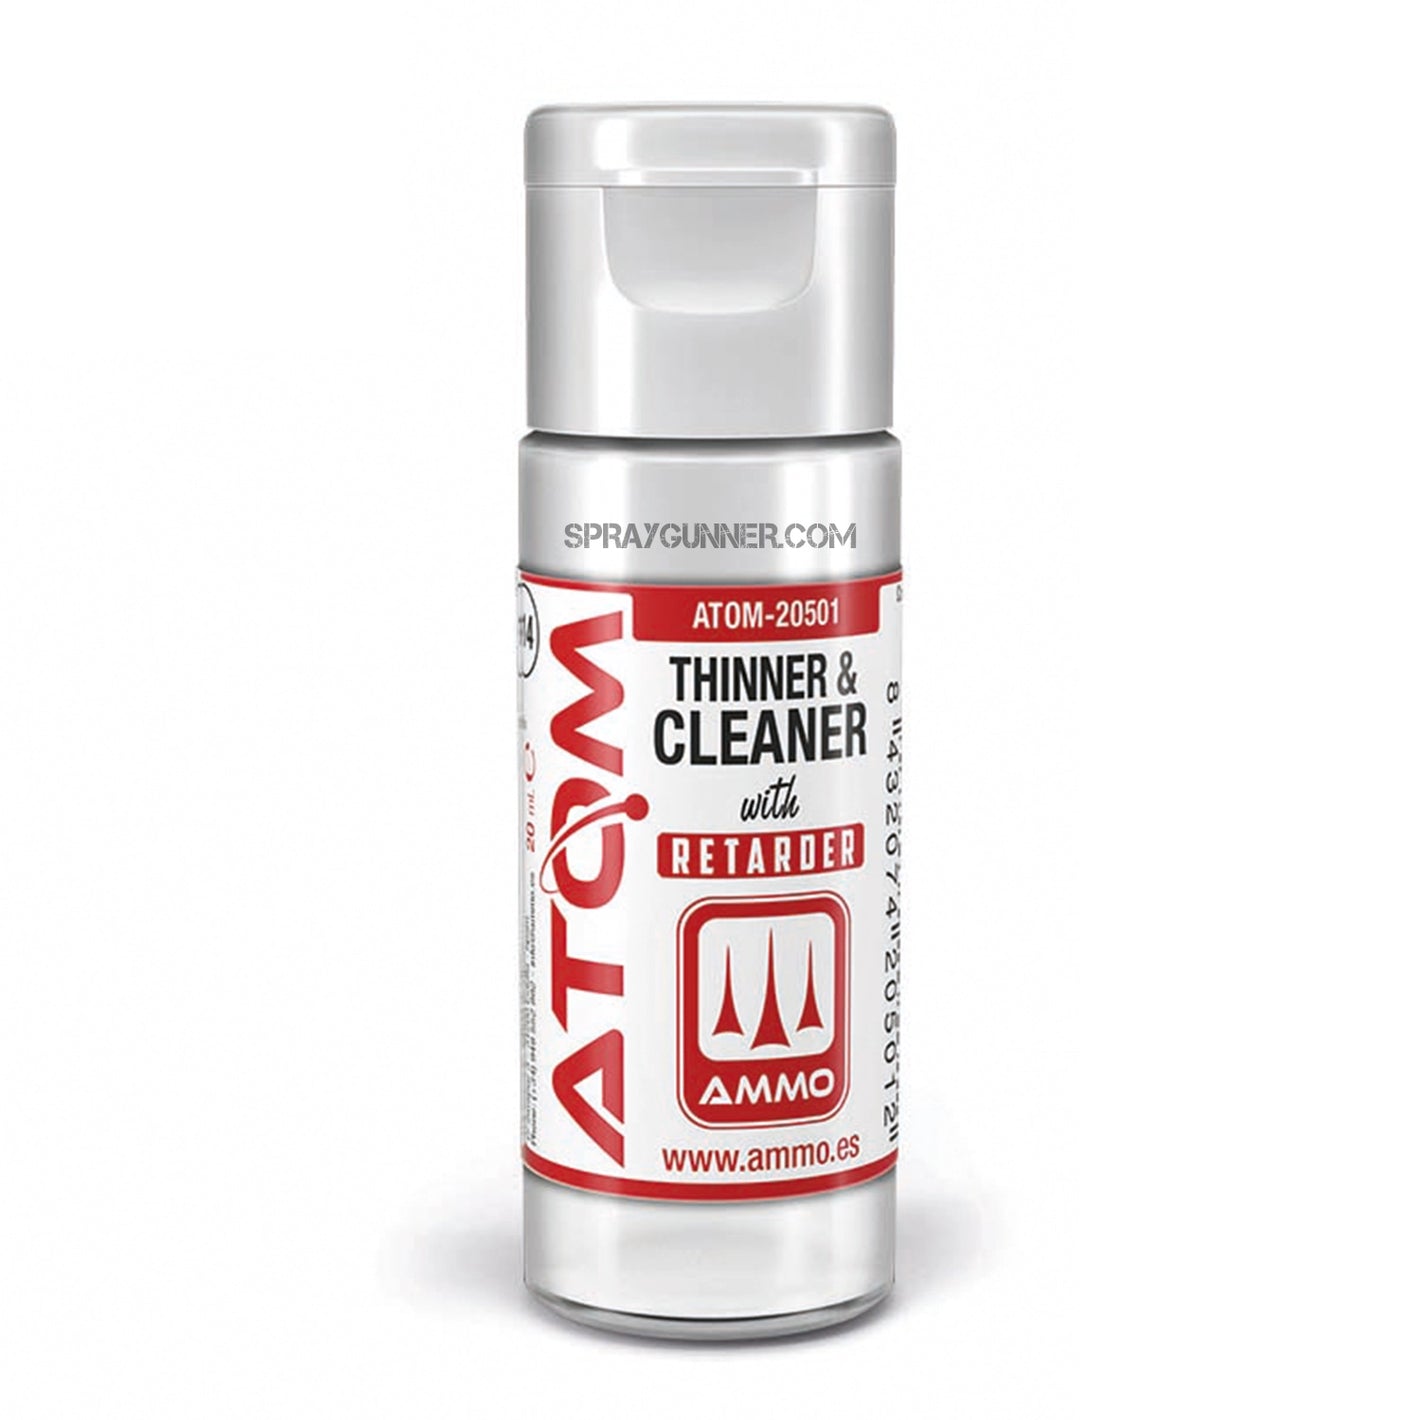 ATOM Thinner and Cleaner with Retarder 20mL